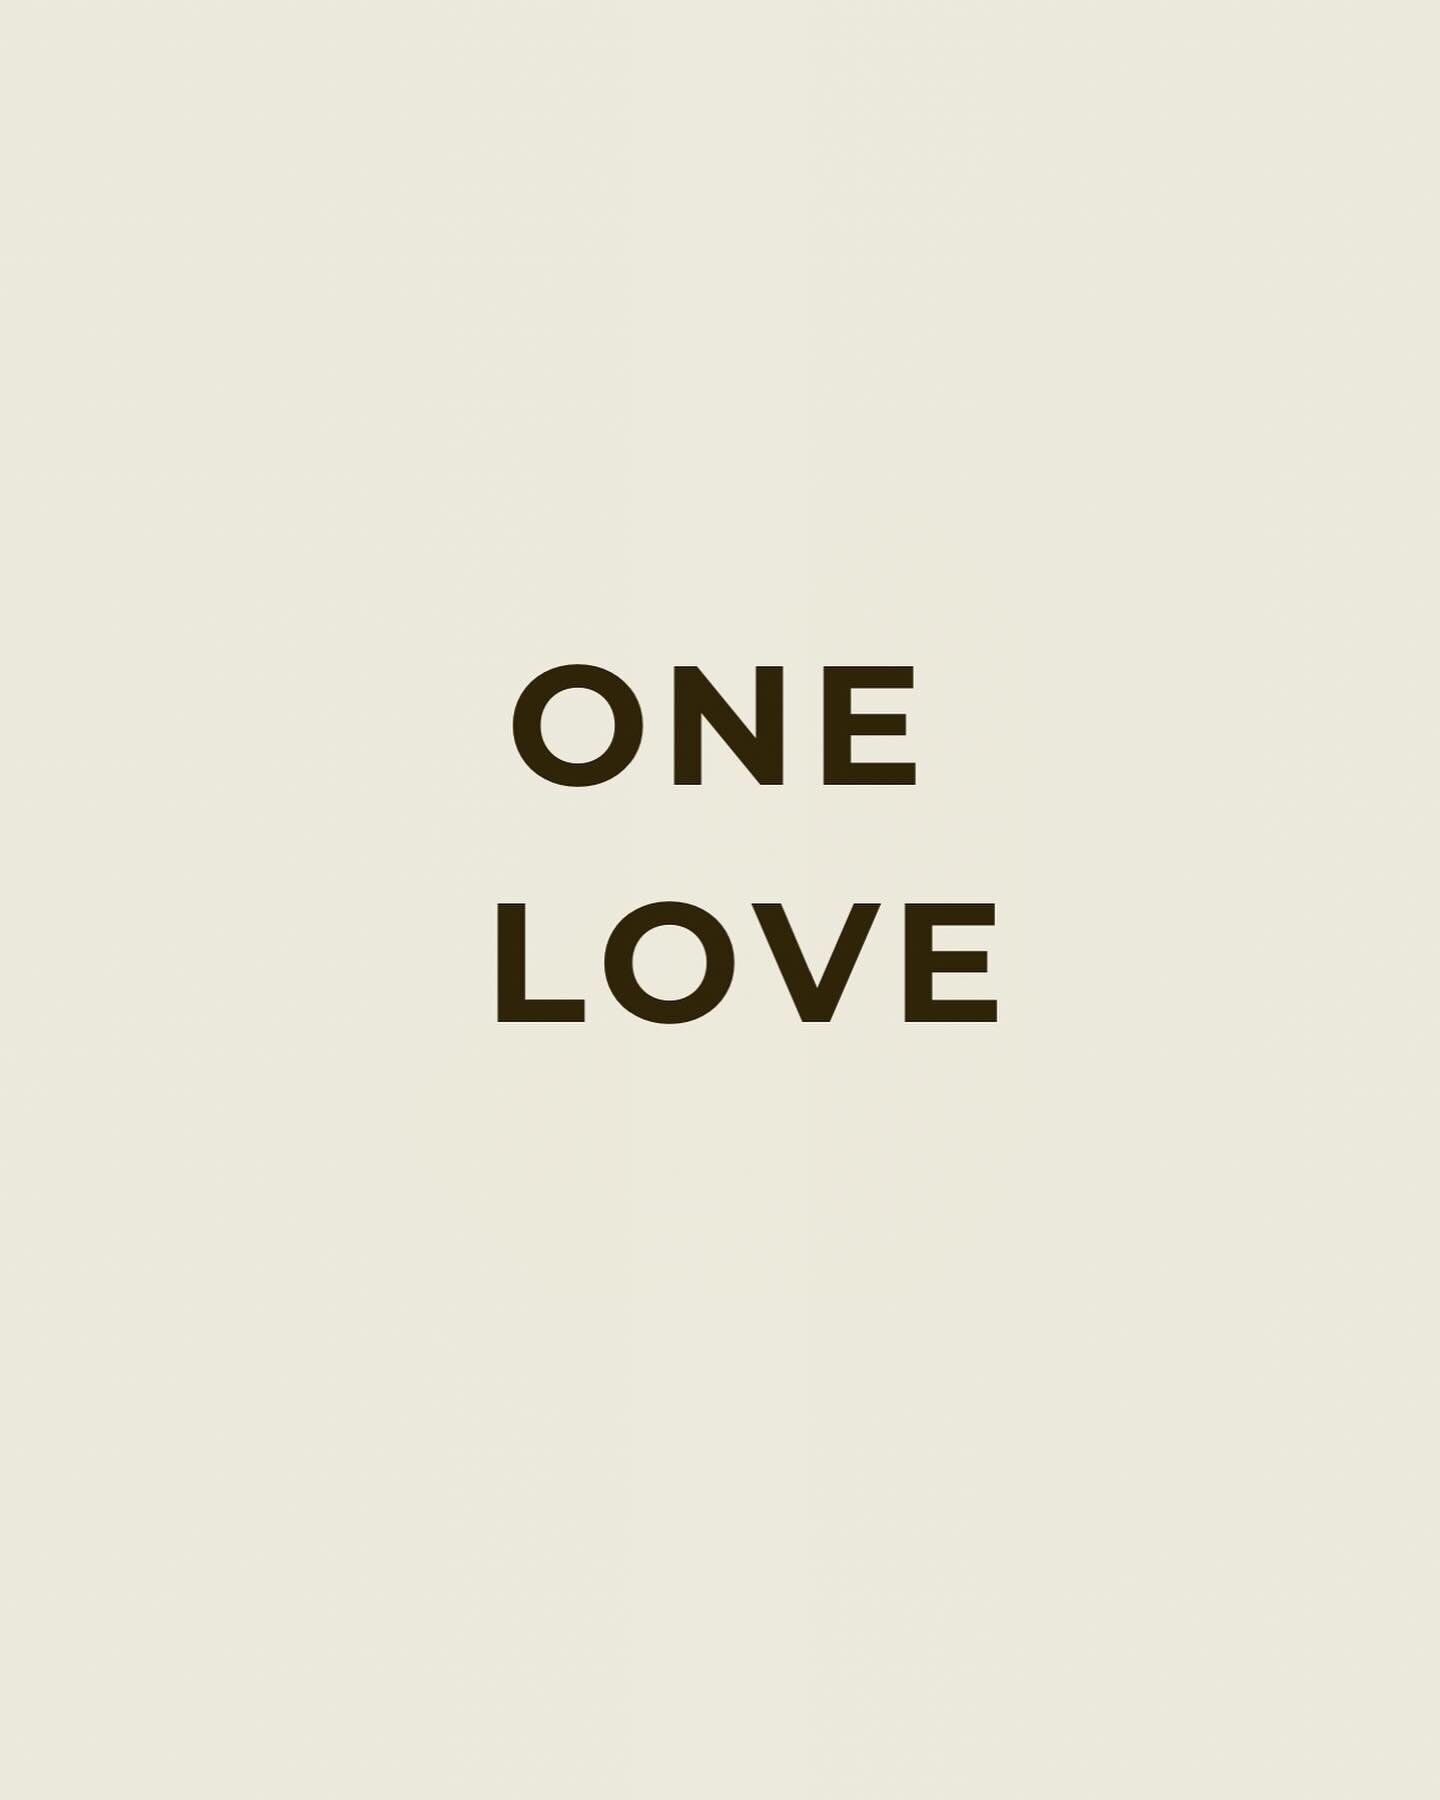 V Day&hellip; One LOVE, one planet, one people.

We, humans, share a deep intelligence, interconnectedness, interdependence with all living things. For us this V day is spearing love into ending the ways we are normalising the big V word - Violence! 